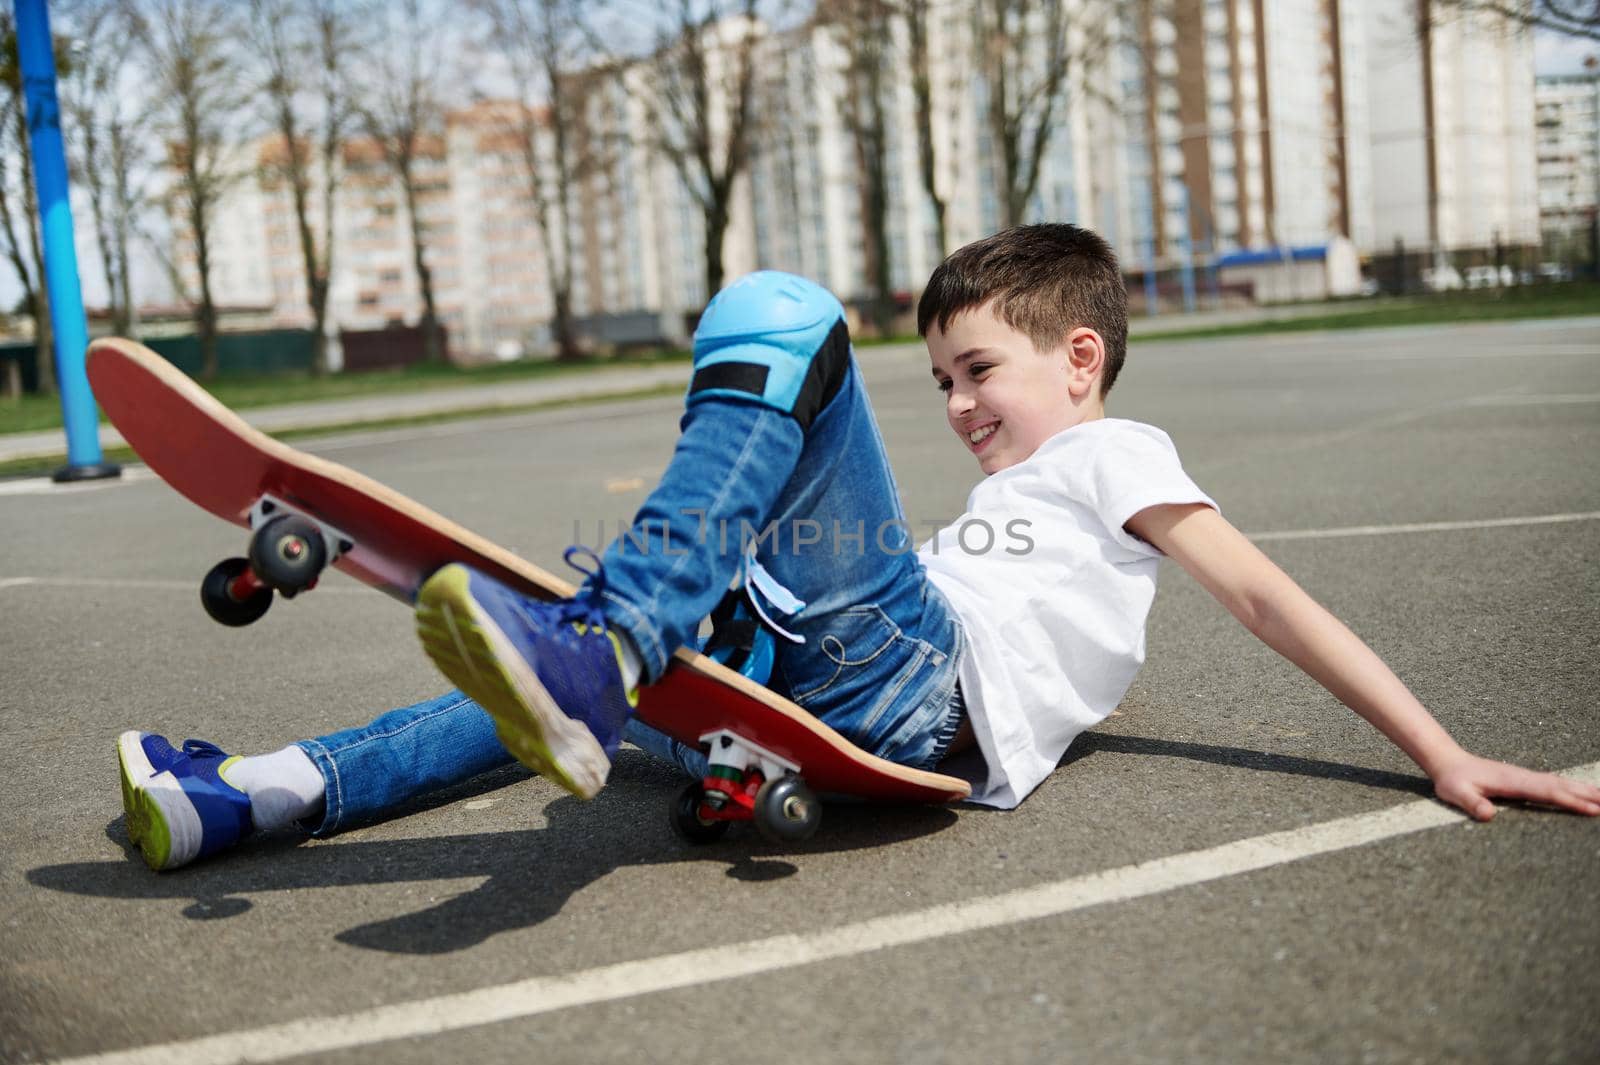 Little boy slipped and fell off the skateboard on the asphalt of the playground by artgf